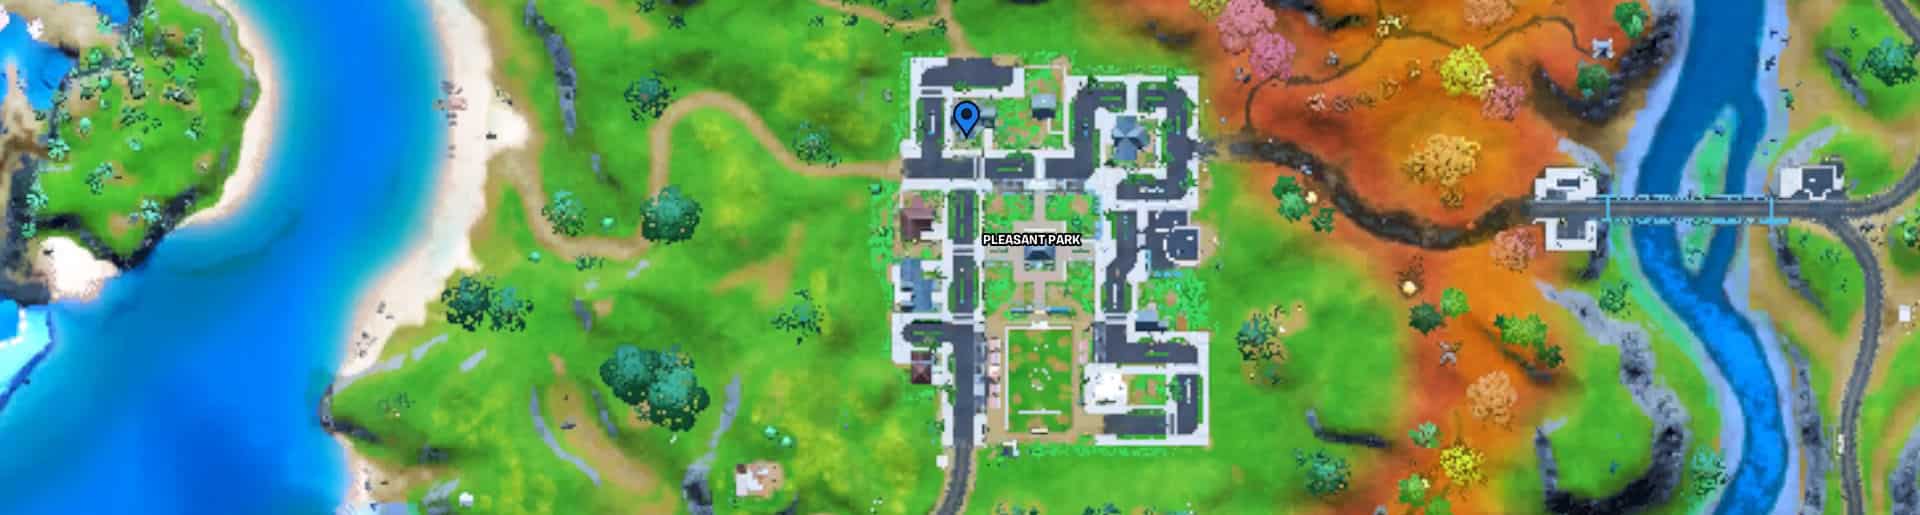 Where to find Jonesy The First in Fortnite